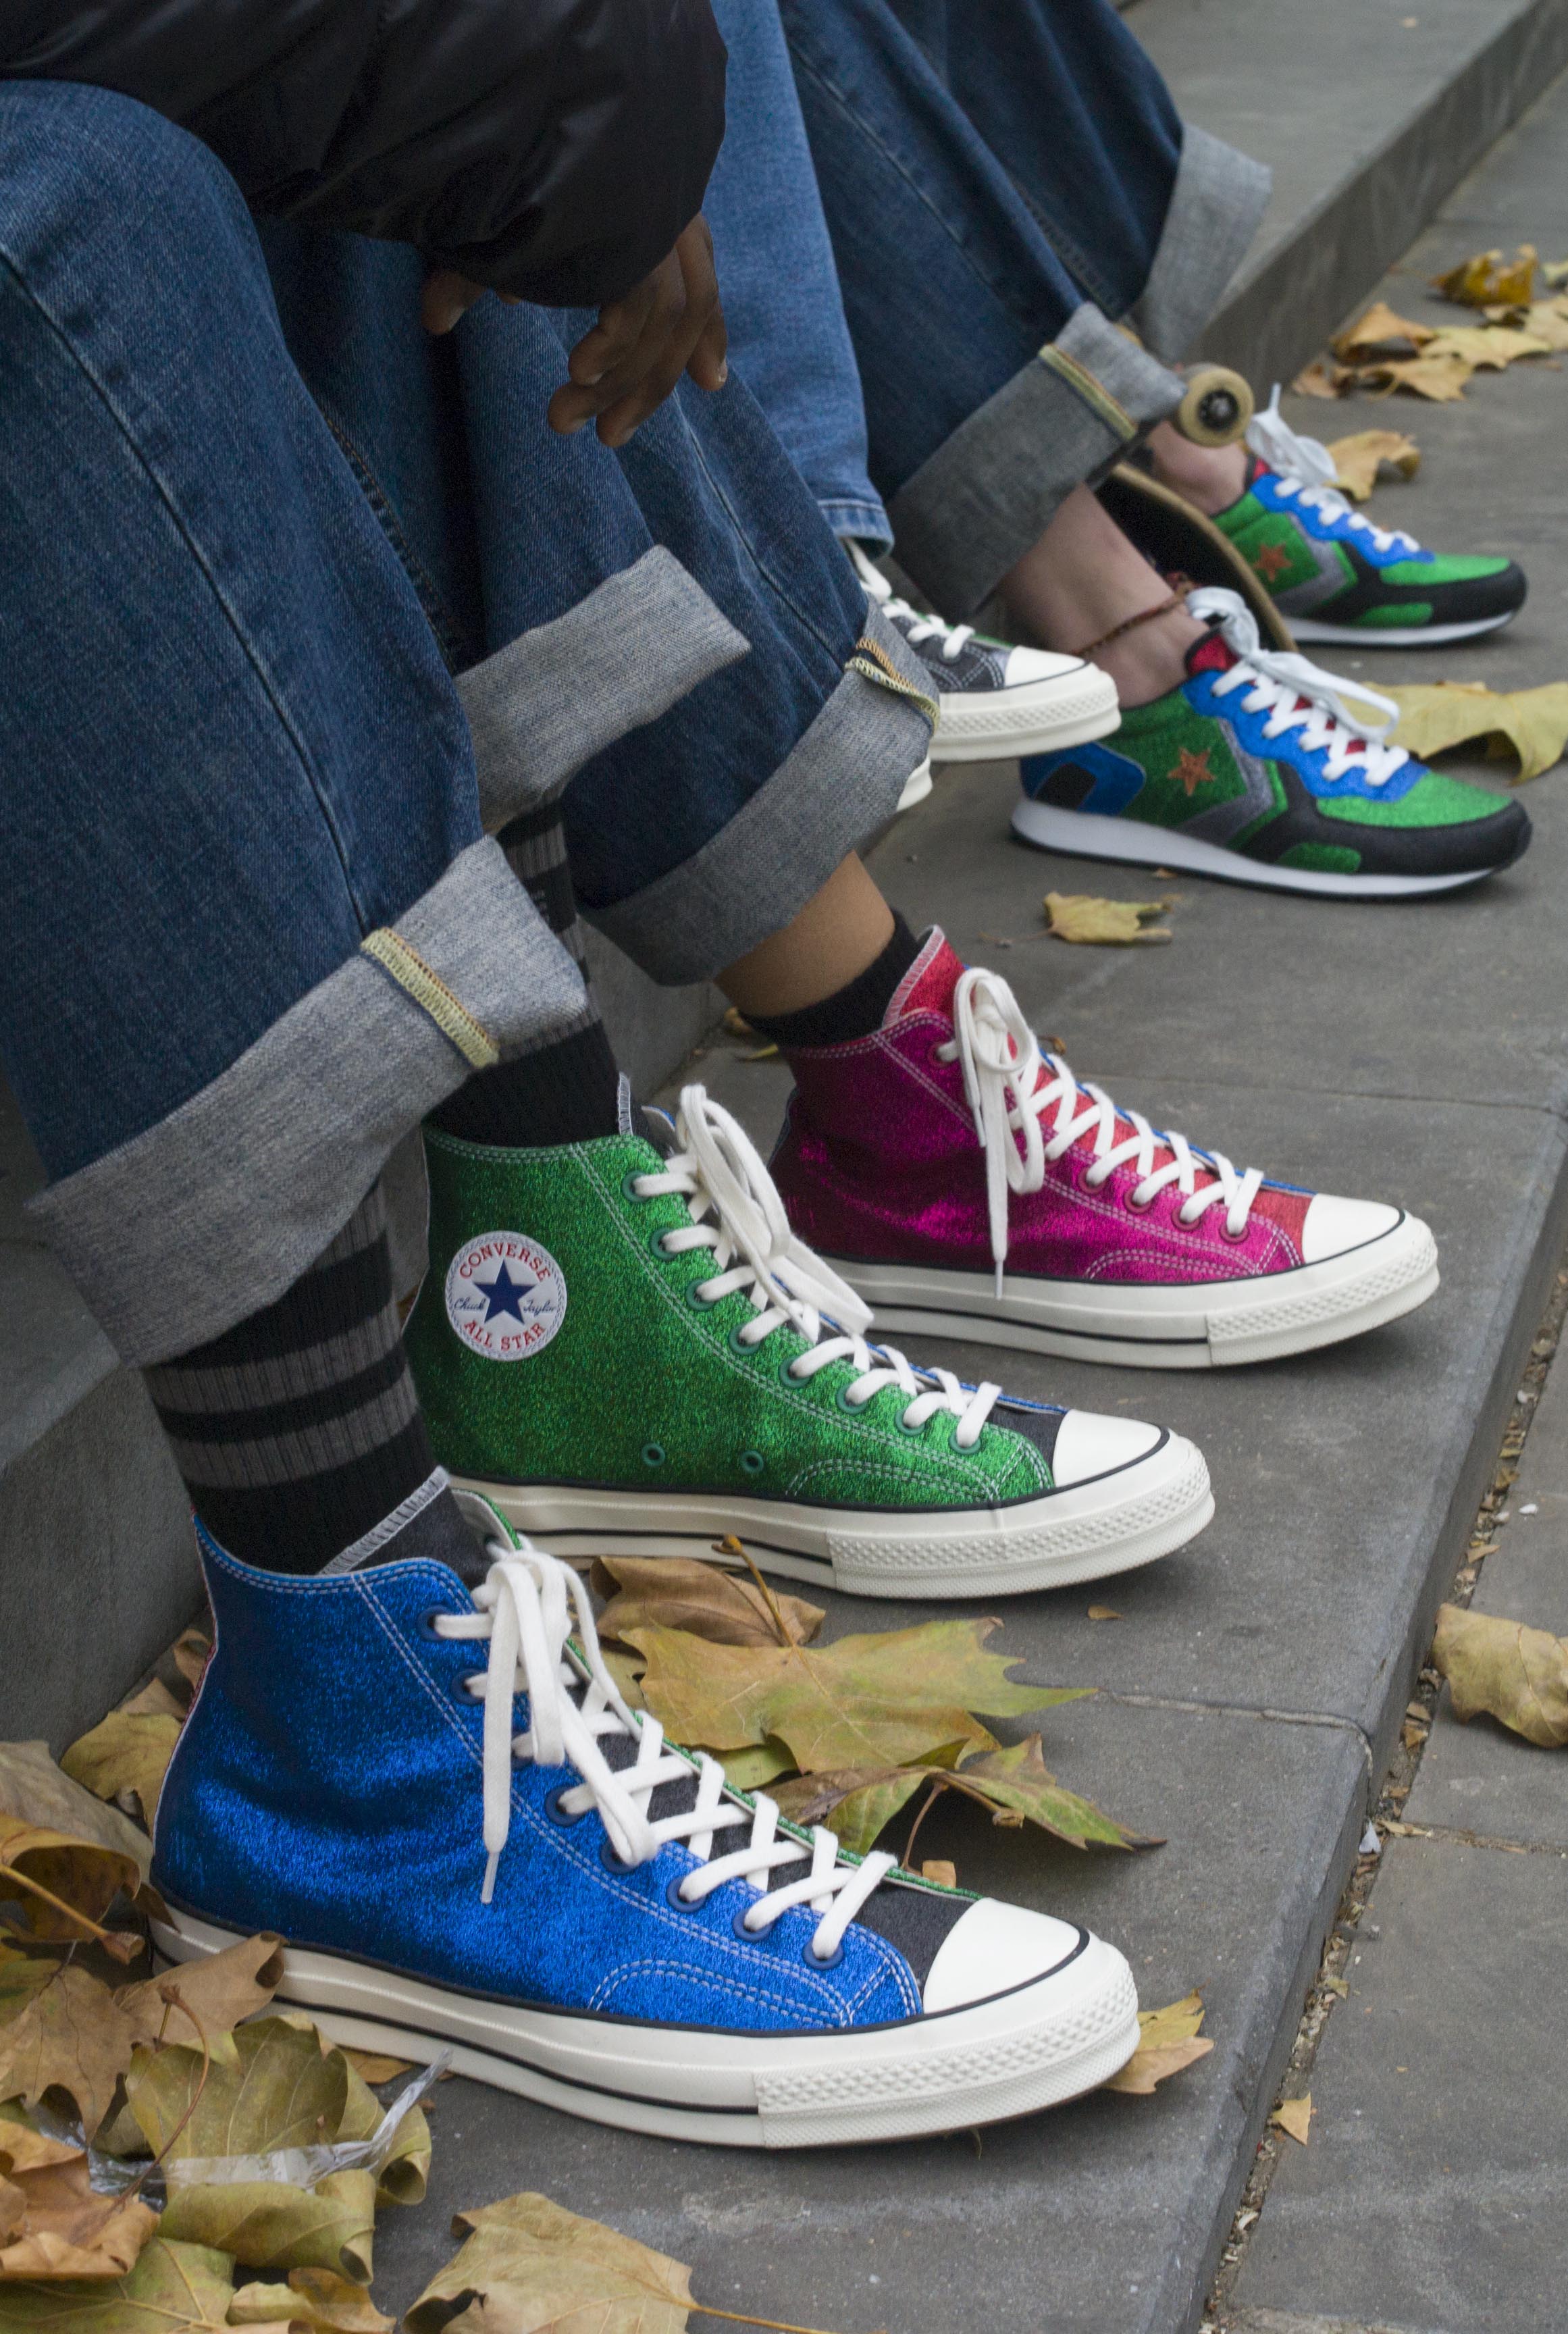 Converse Collab With JW Anderson To Create Glittery Converse